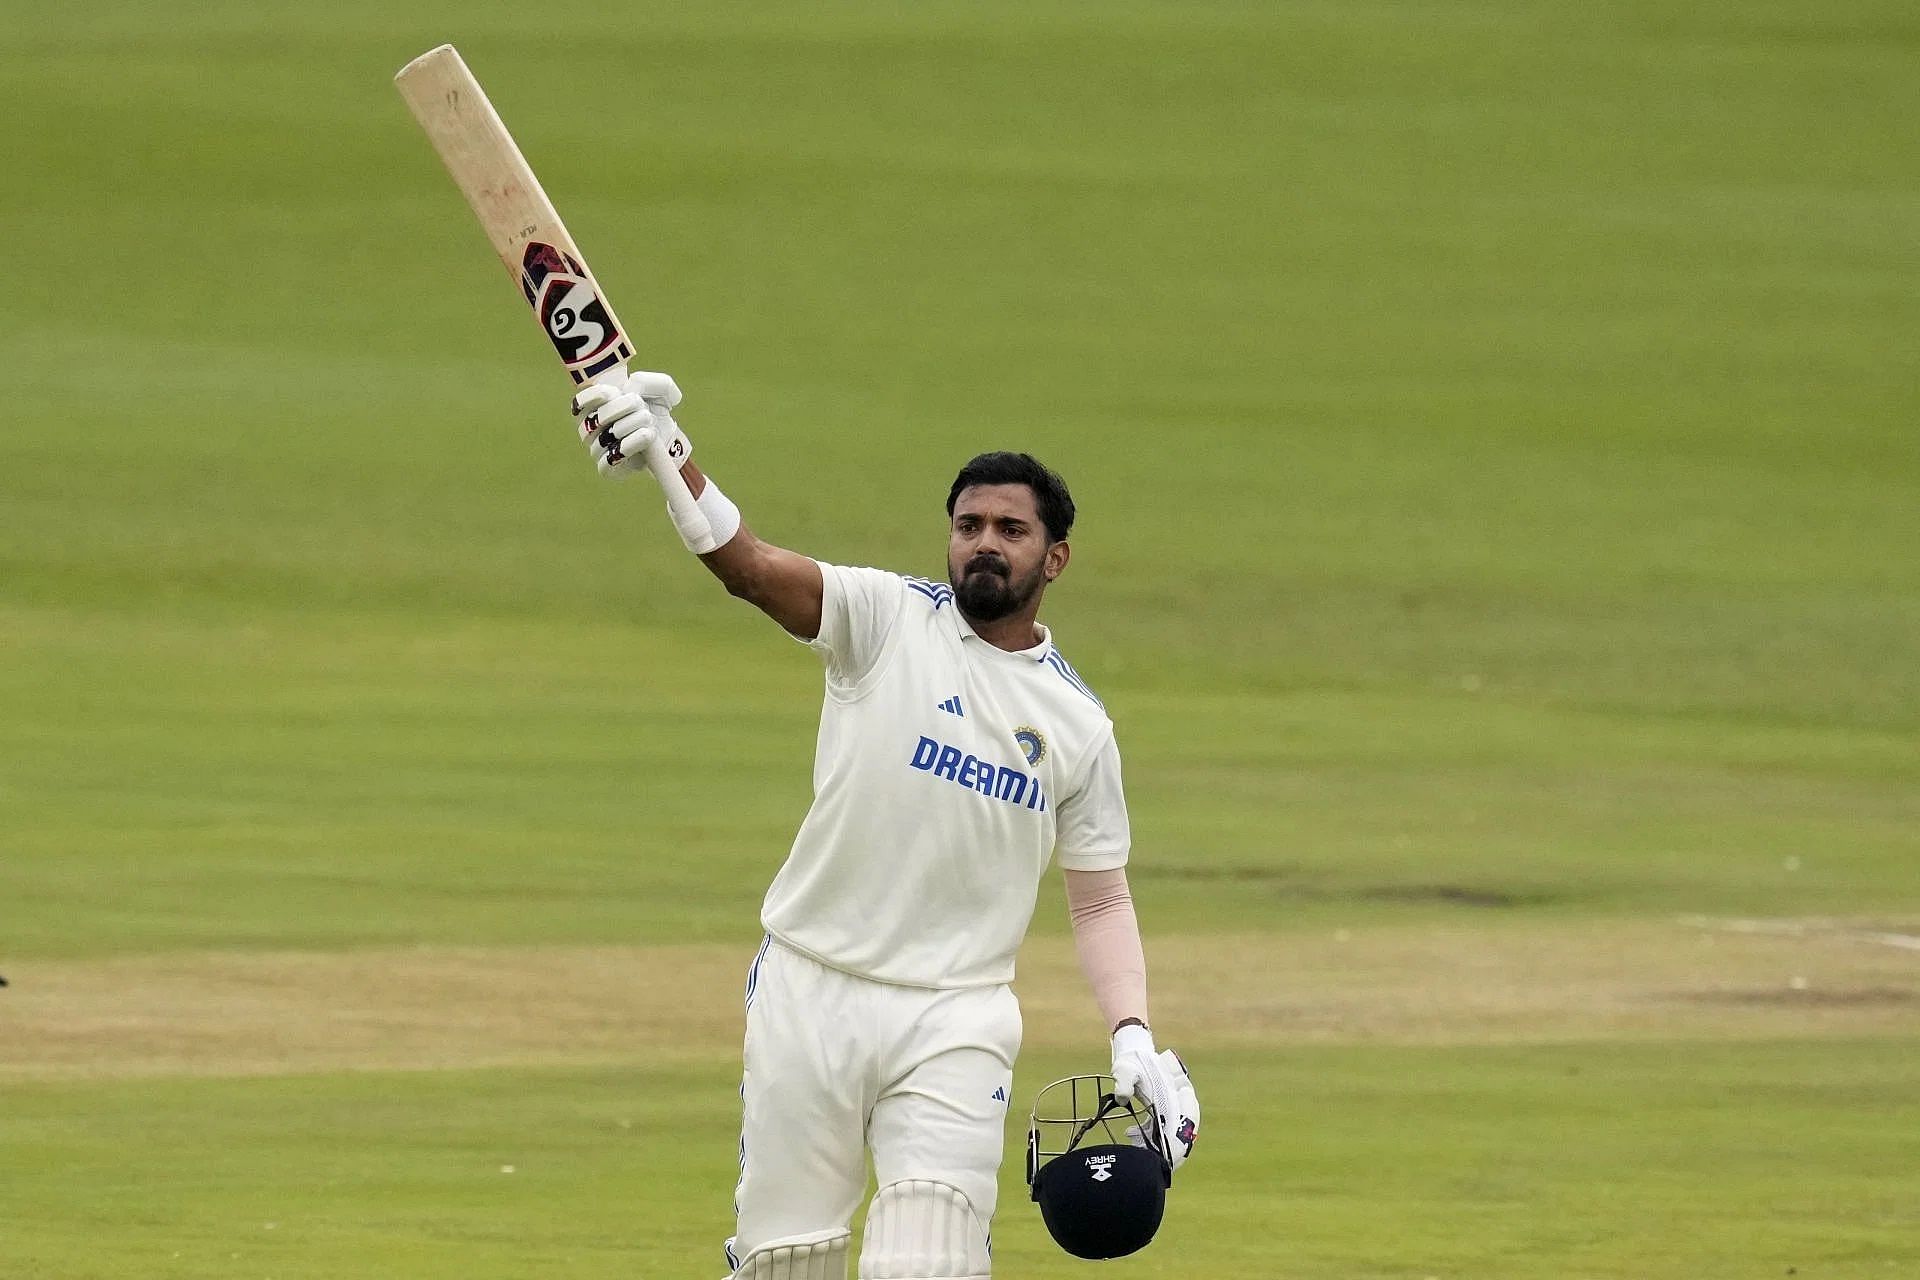 KL Rahul scored a fighting century in the first Test against South Africa. [P/C: AP]